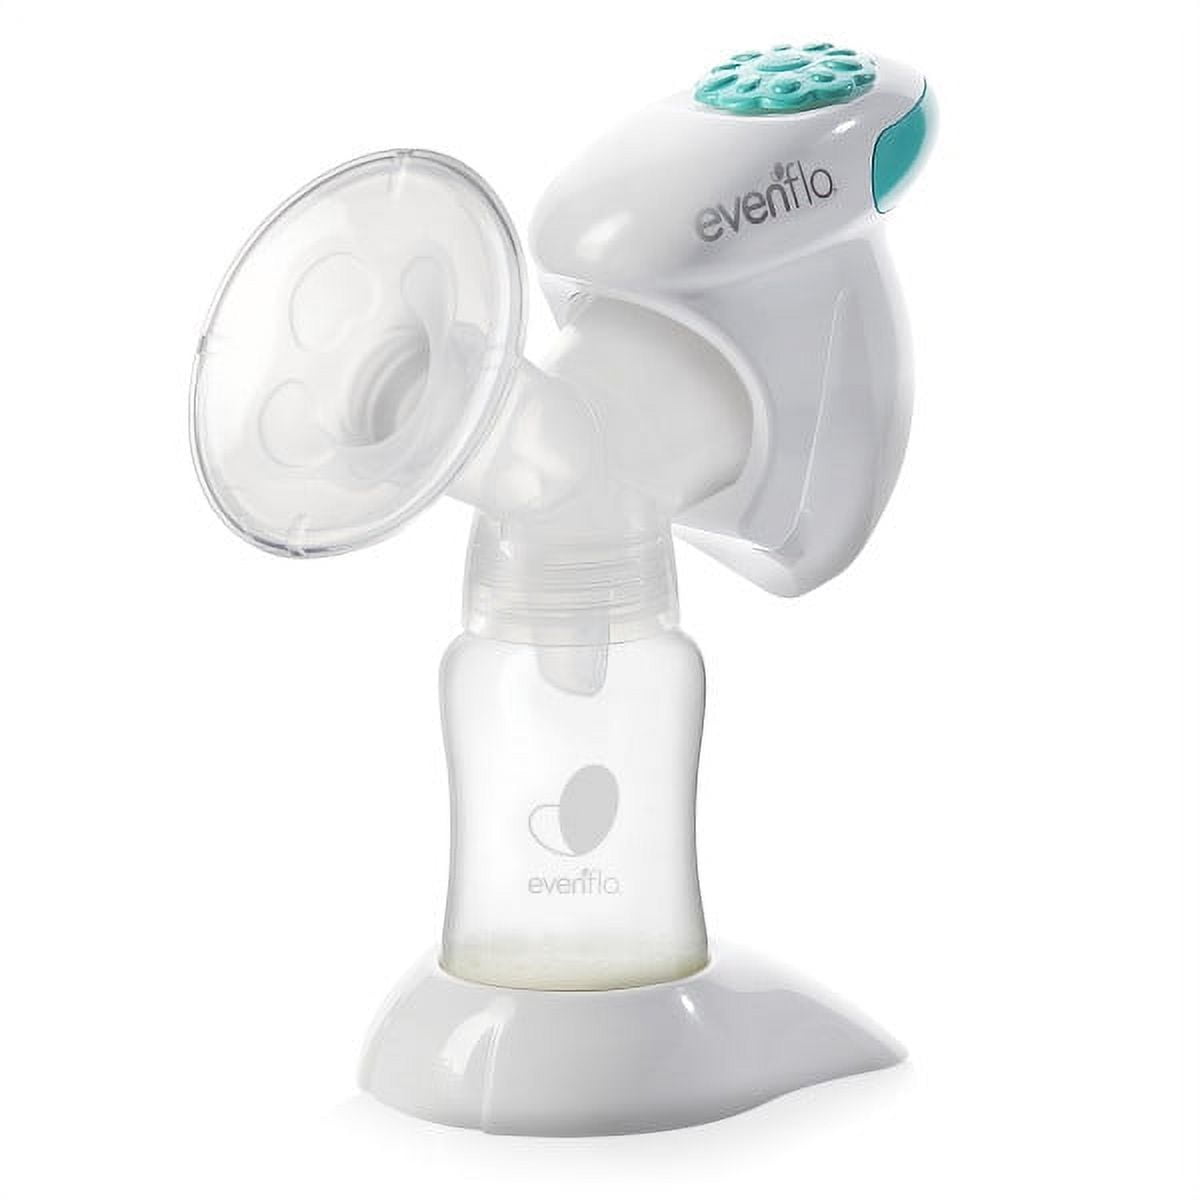 Evenflo Advanced Single Electric Breast Pump, includes Flanges